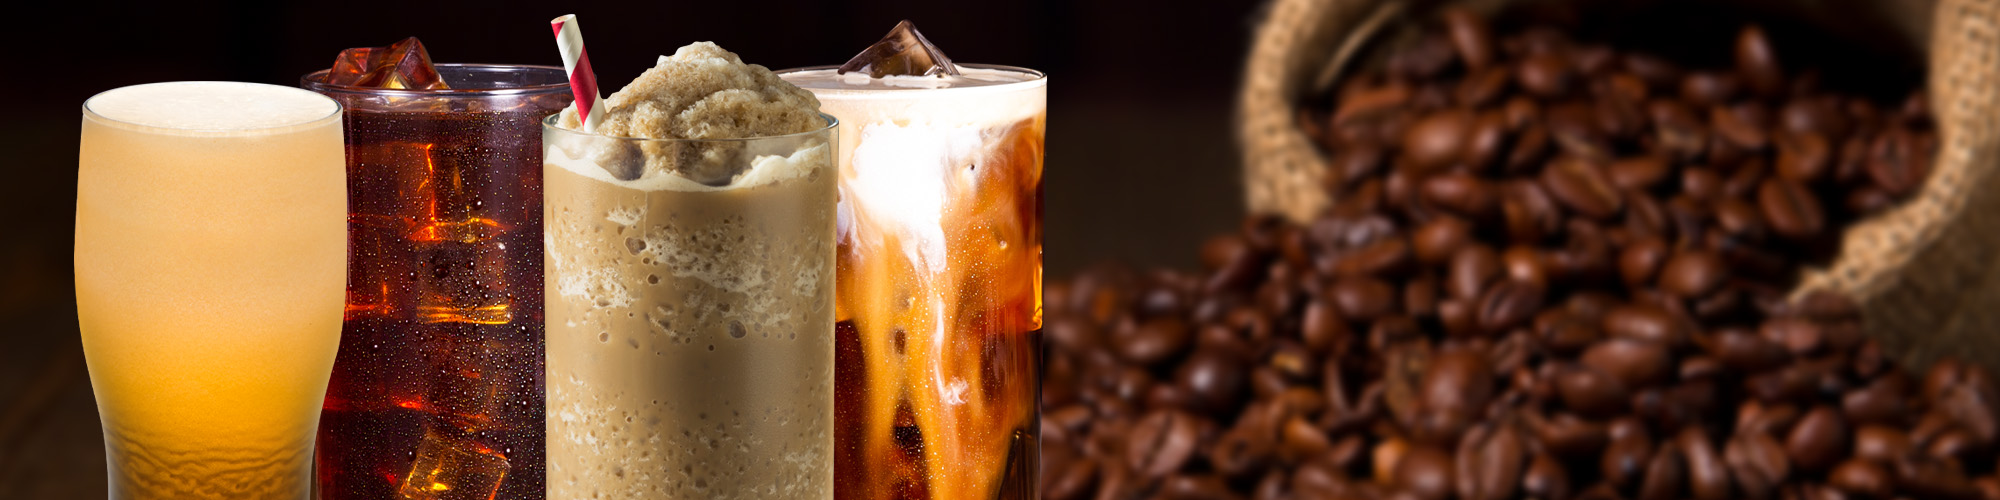 Cold coffee beverages